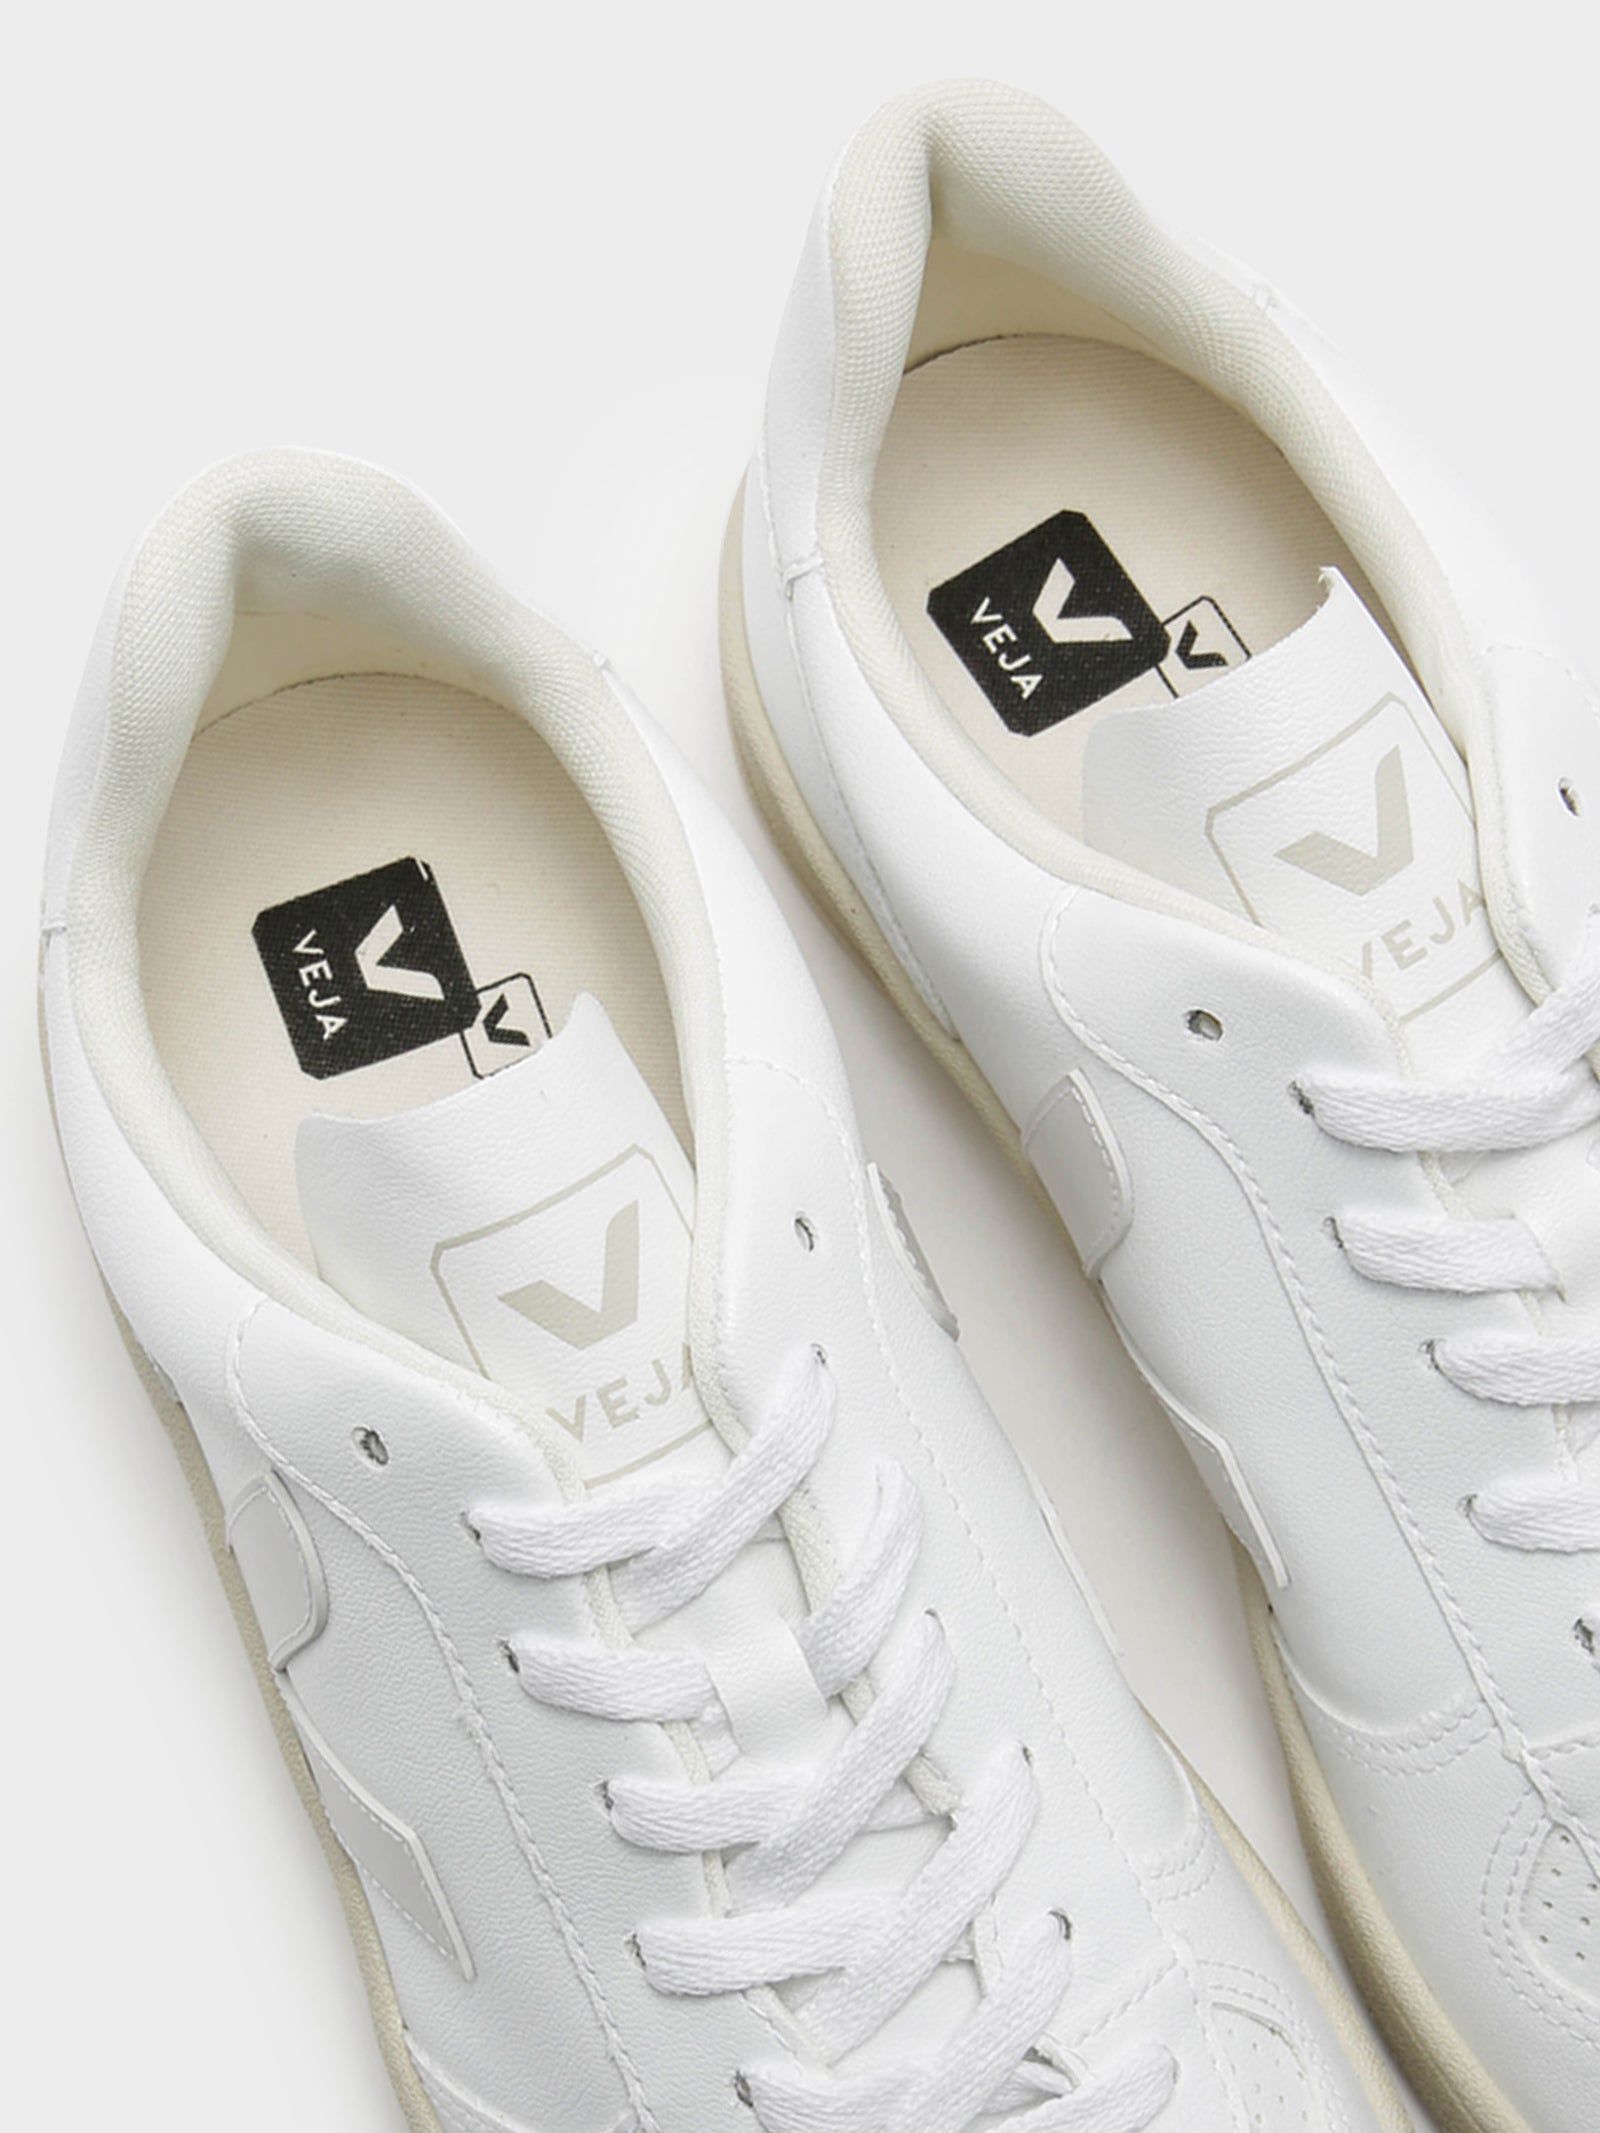 Unisex V-10 Leather Sneakers in White - Glue Store